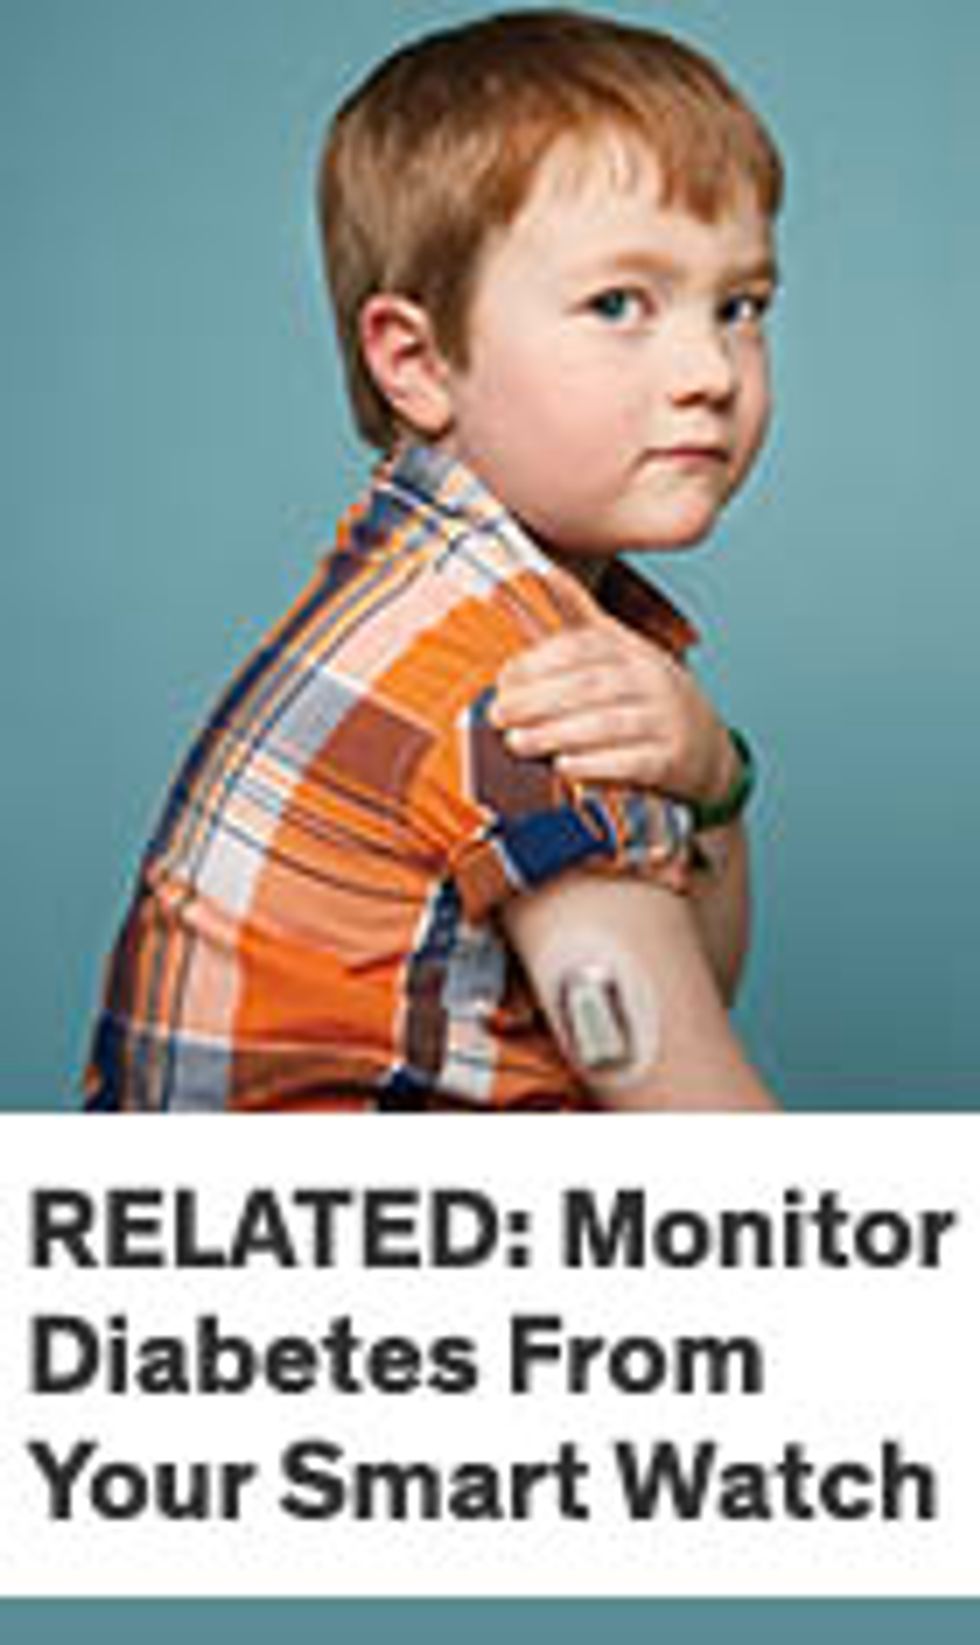 graphic link to article on diabetes monitoring